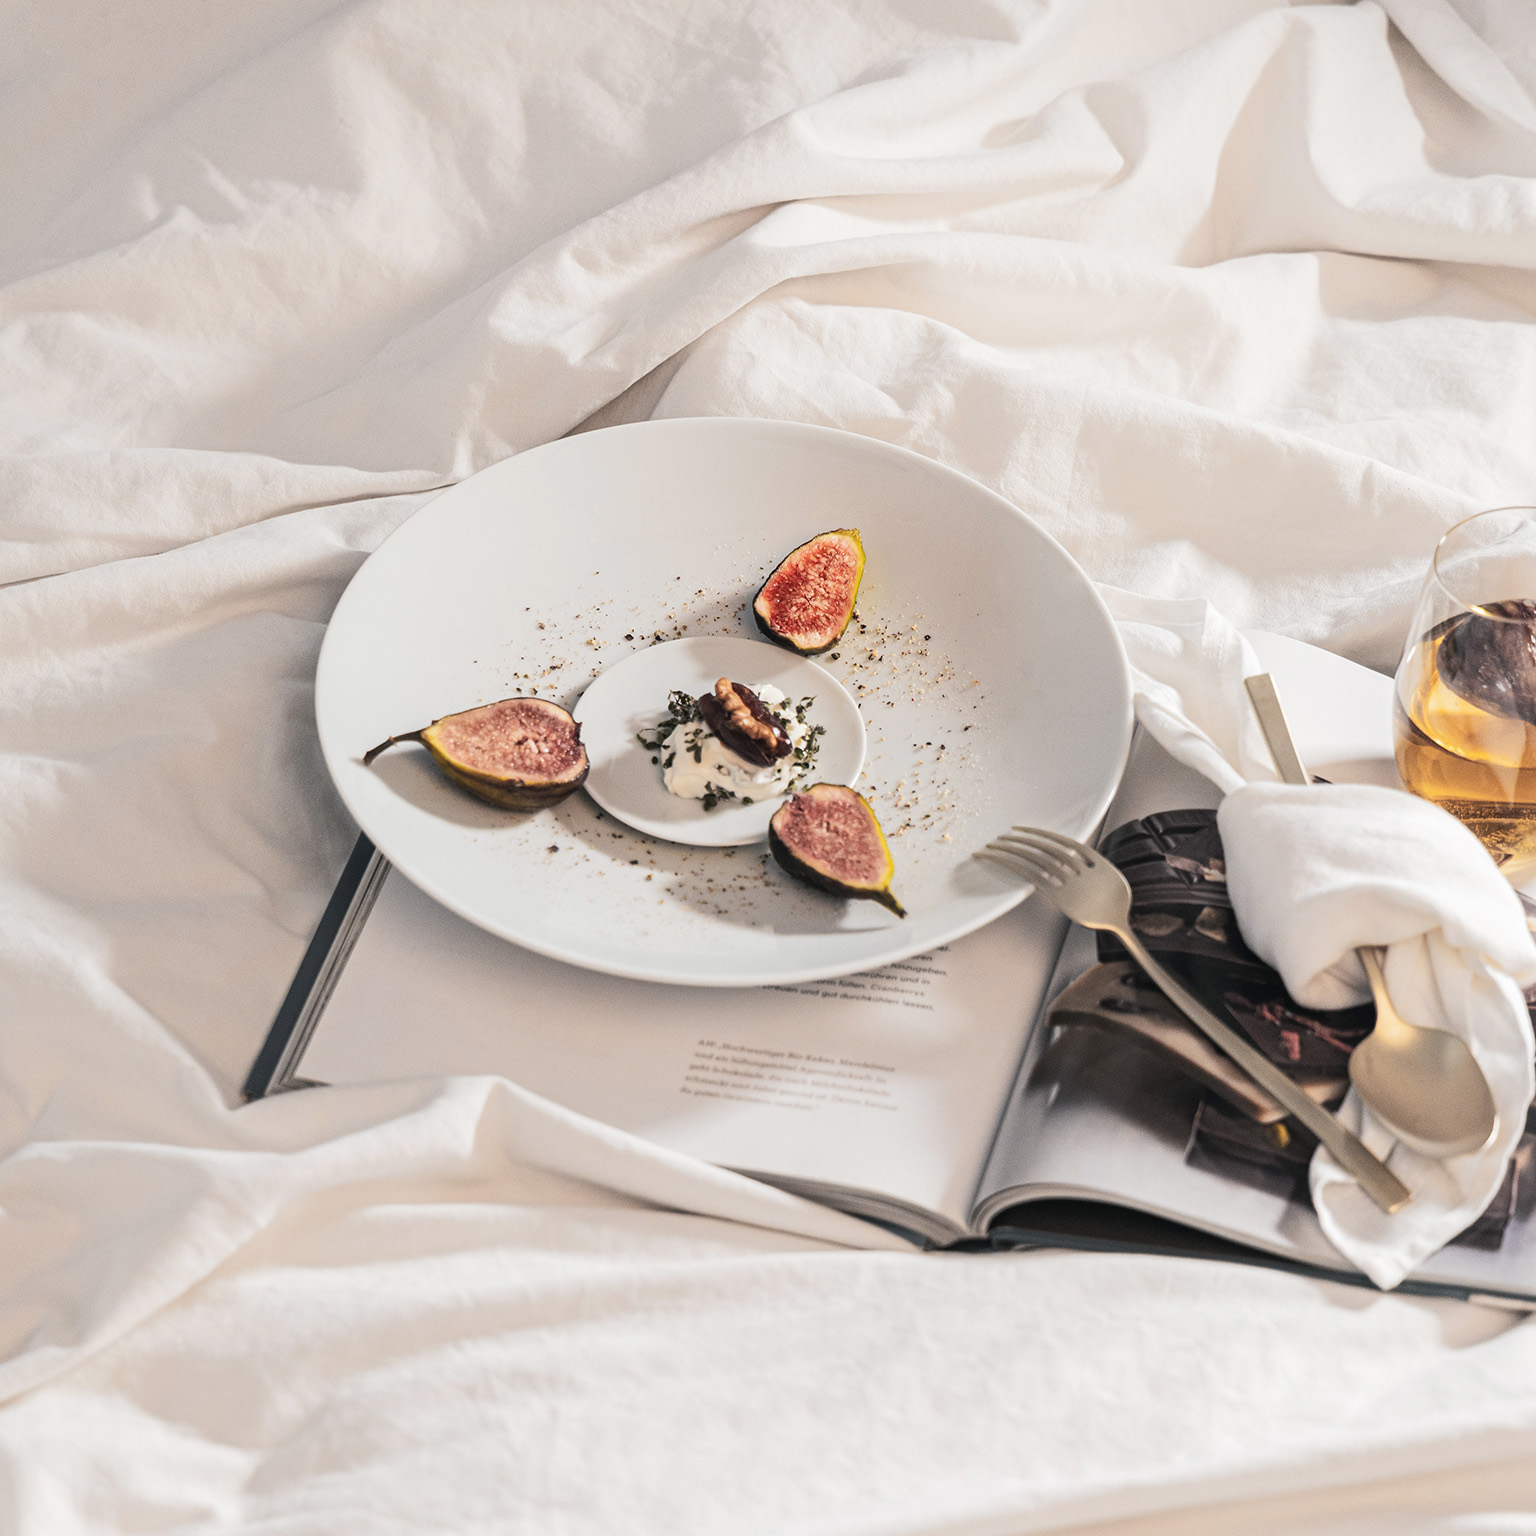 TAC plate and bread plate garnished with figs and dessert lie on a table sheet along with an open book, cutlery, white napkin and glass.